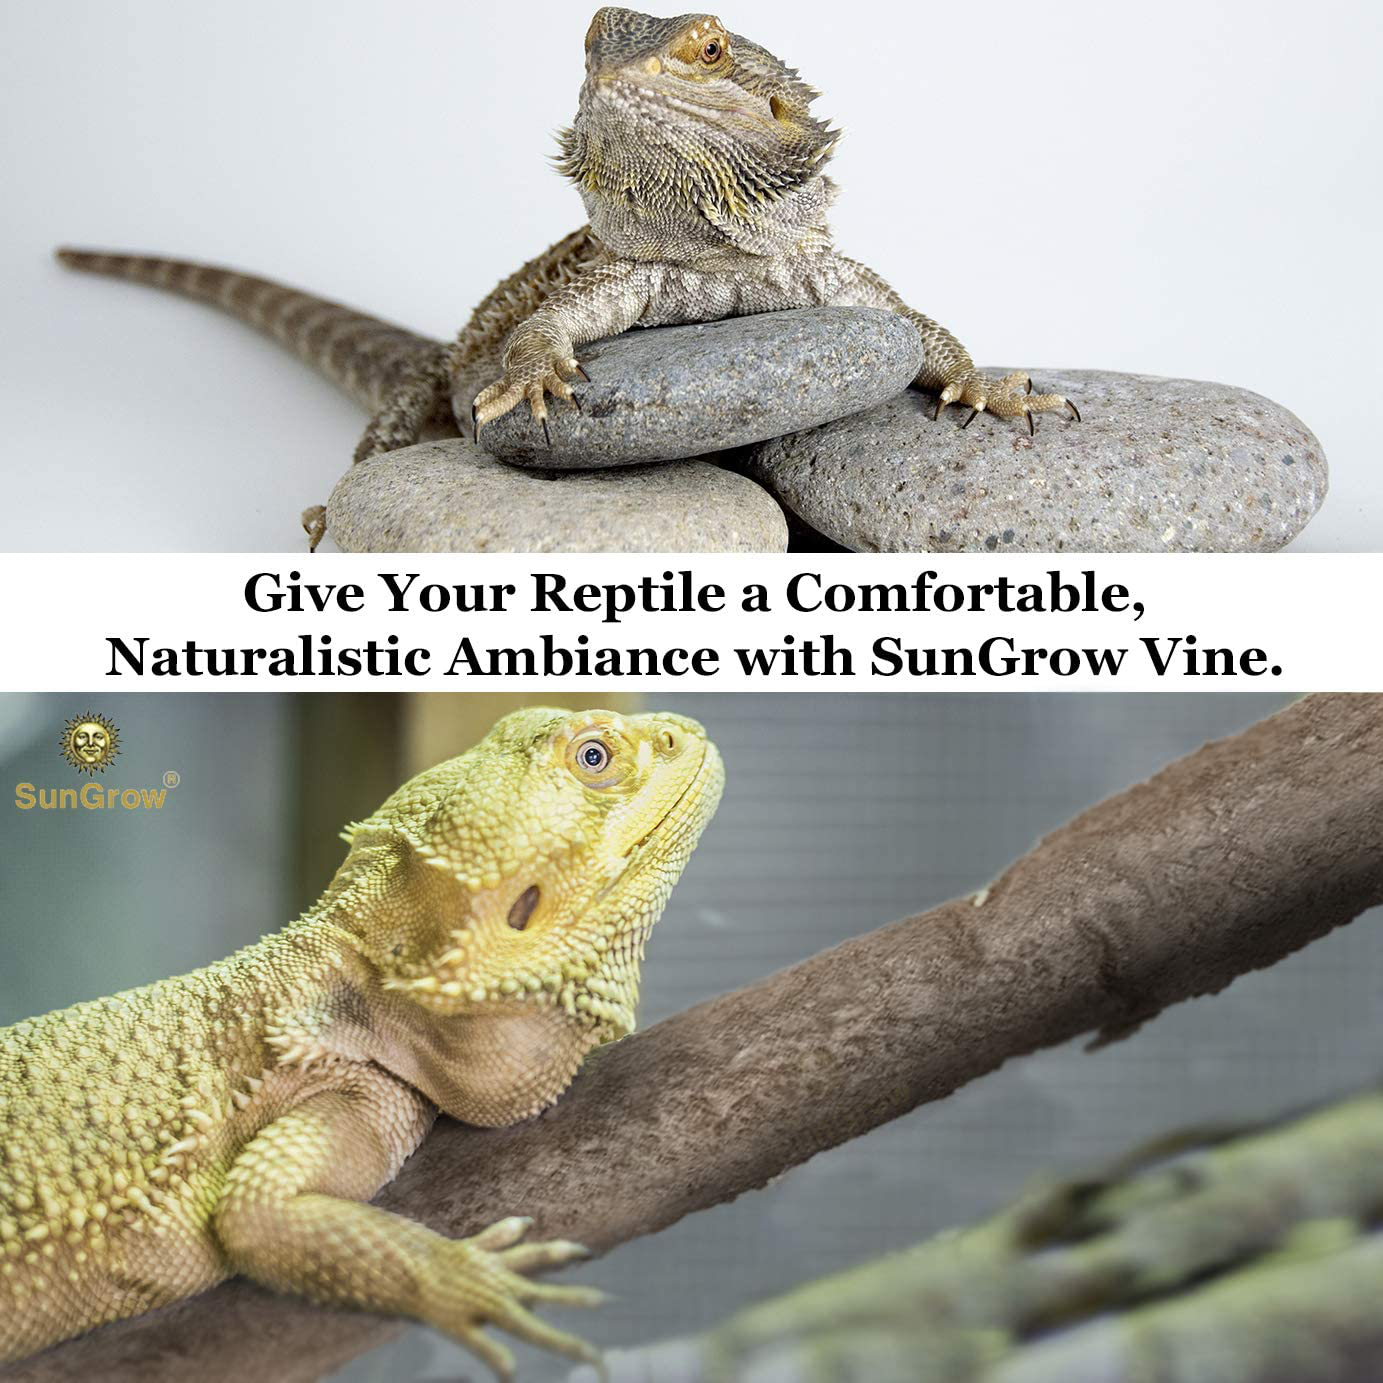 Sungrow Animal Vine, 6 Feet Long, Twistable Branch, Creates Realistic Habitat for Reptiles and Amphibians, Décor and Climbing Toy for Chameleons, Tree Frogs and Geckos, Includes 5 Suction Cups Animals & Pet Supplies > Pet Supplies > Reptile & Amphibian Supplies > Reptile & Amphibian Habitats SunGrow   